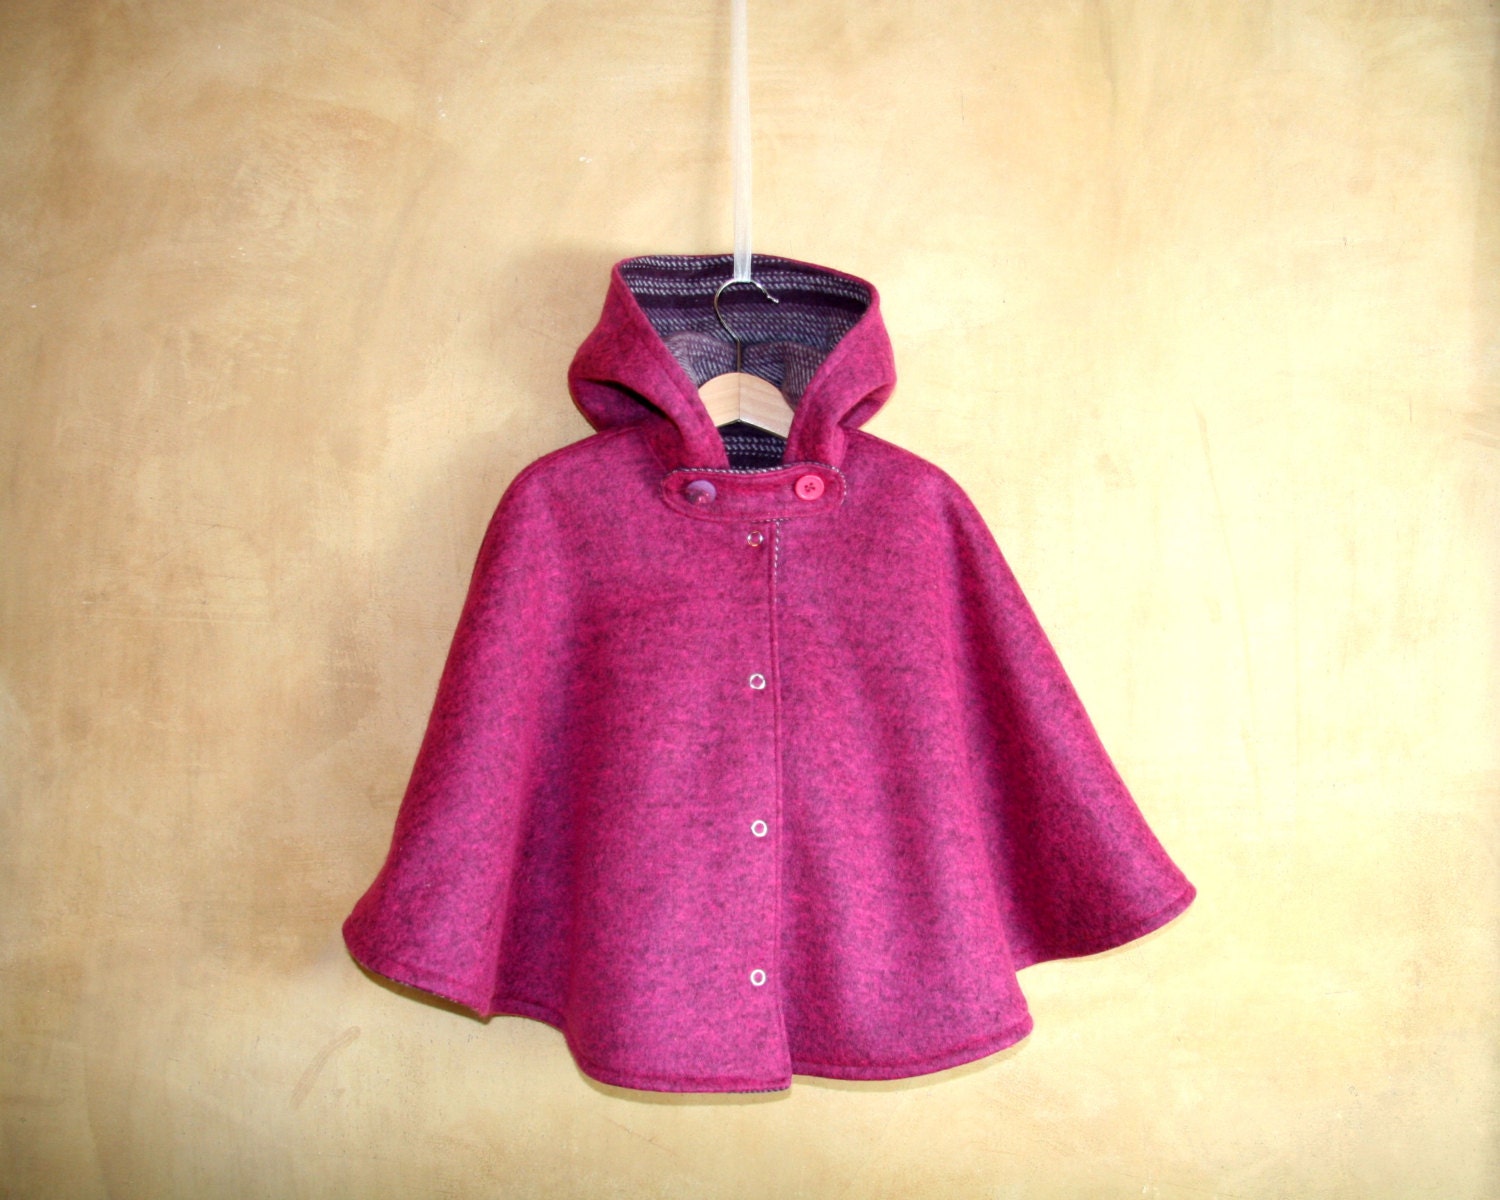 Hooded Baby Cape toddler girl winter warm wool cape lined in